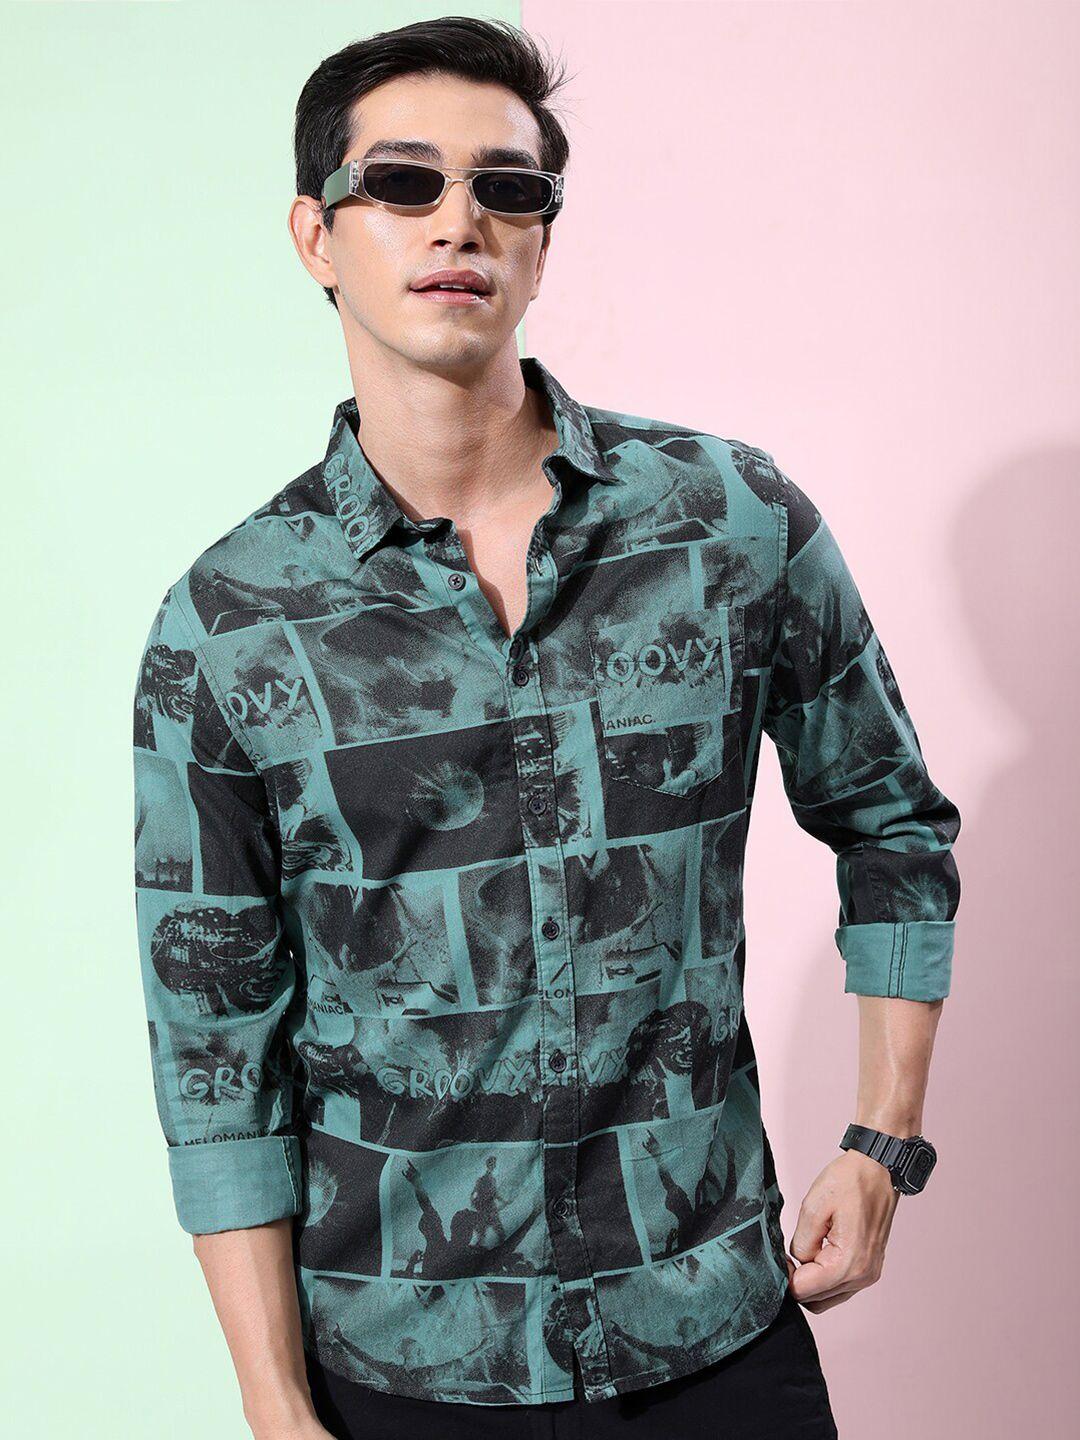 ketch slim fit graphic printed cotton casual shirt